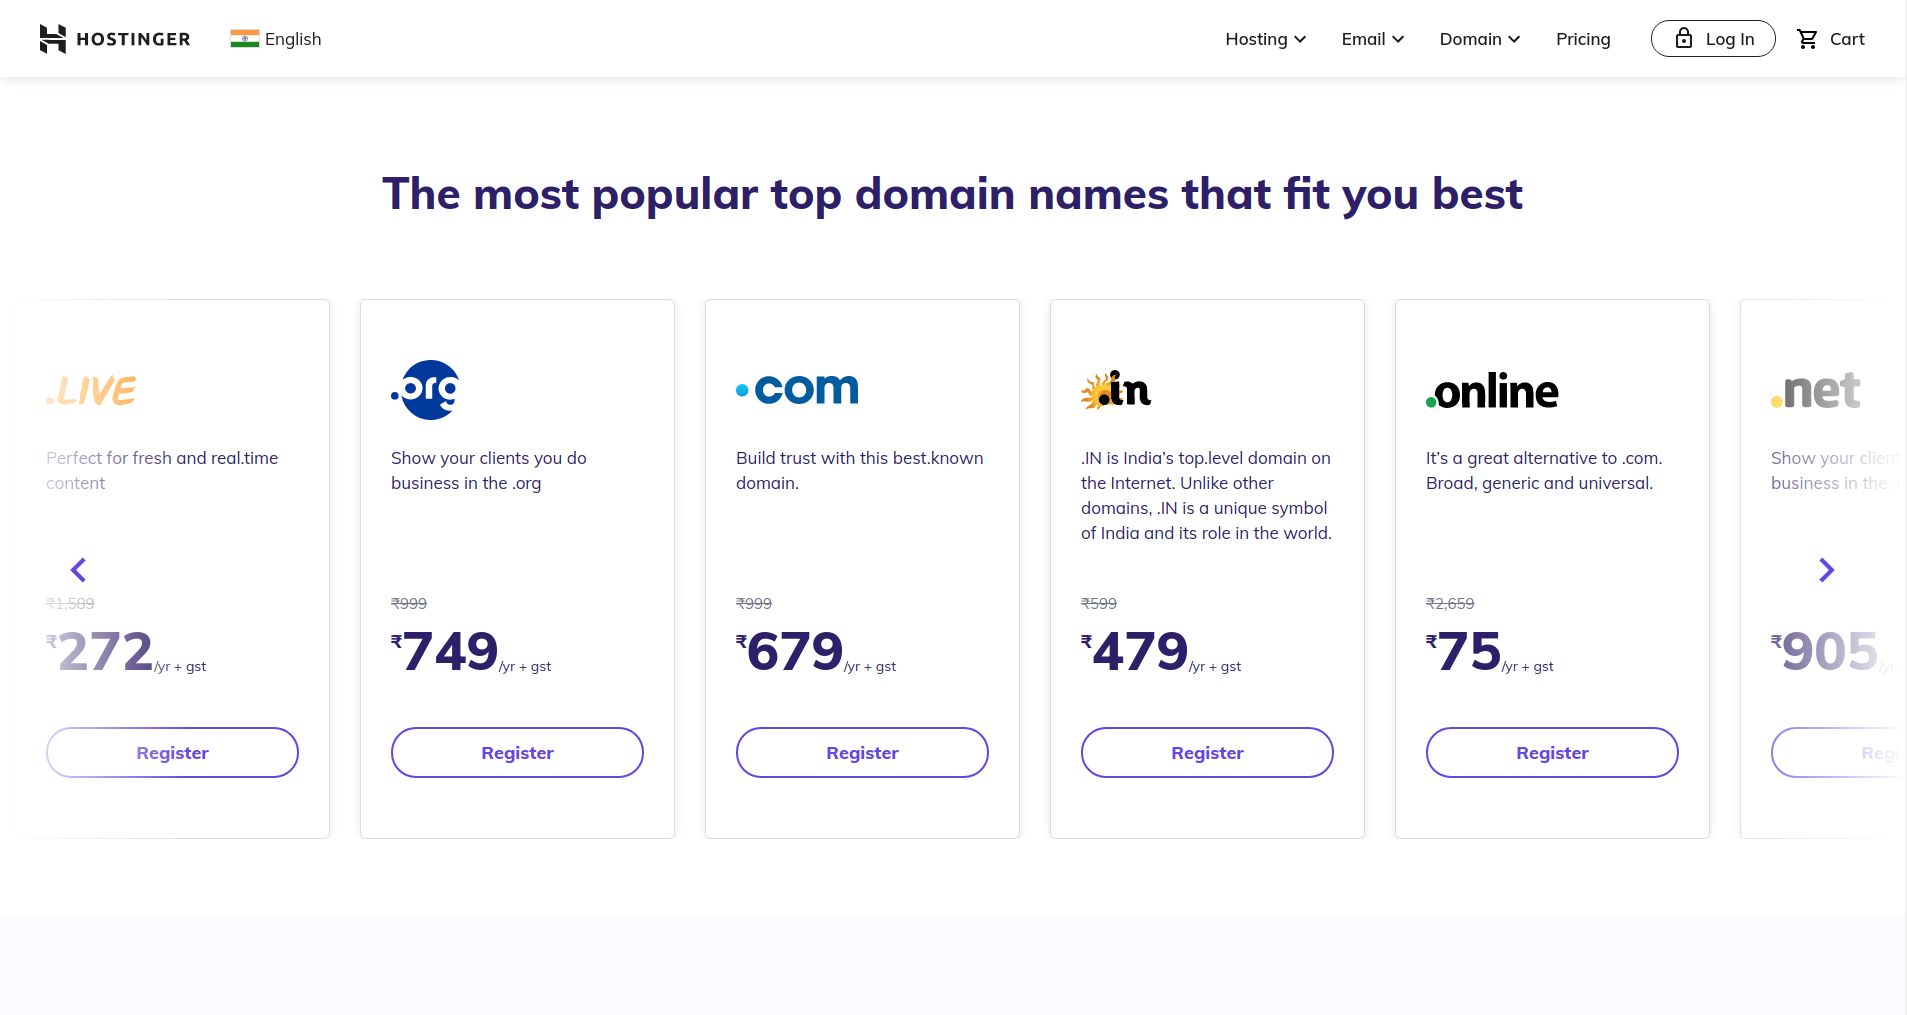 How to Get the Cheapest Domain Name from Hostinger